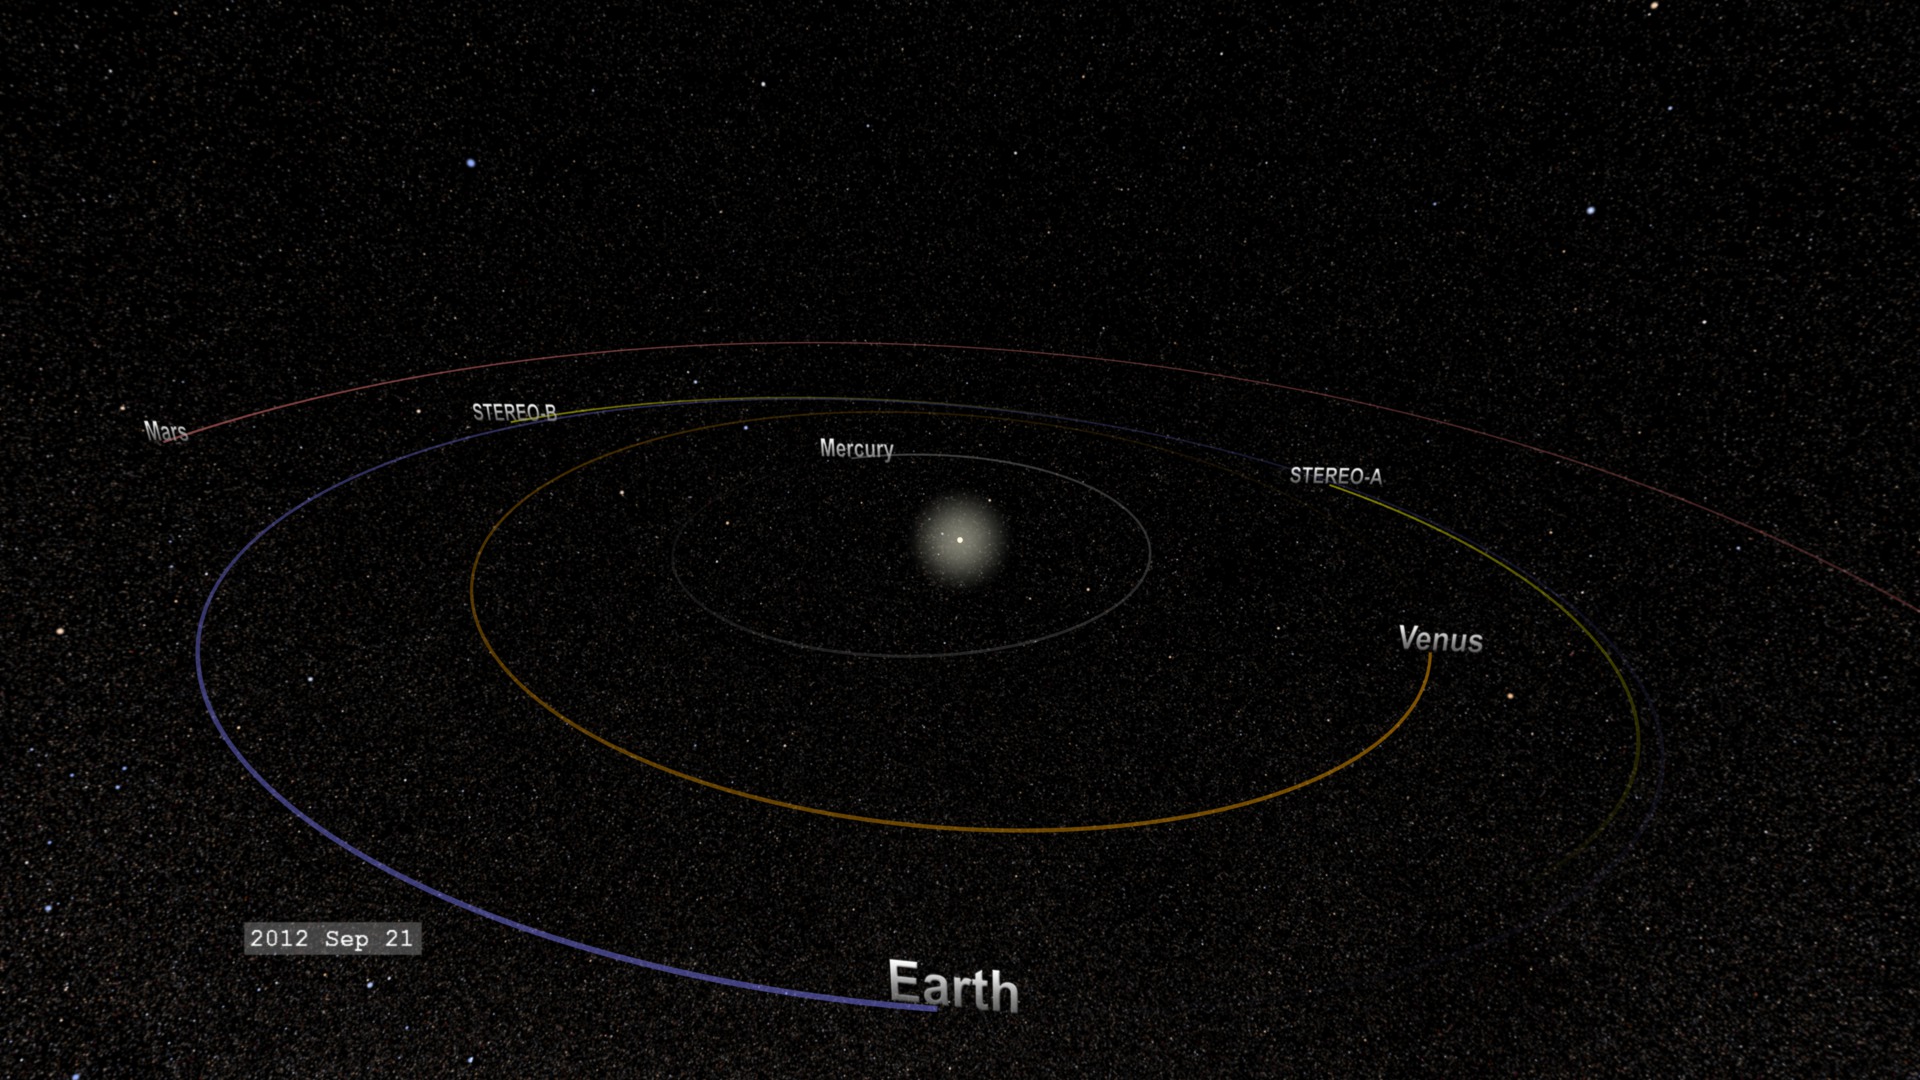 A movie of showing the orbits of the STEREO A & B spacecraft in relation to the planets of the inner solar system in 2012.